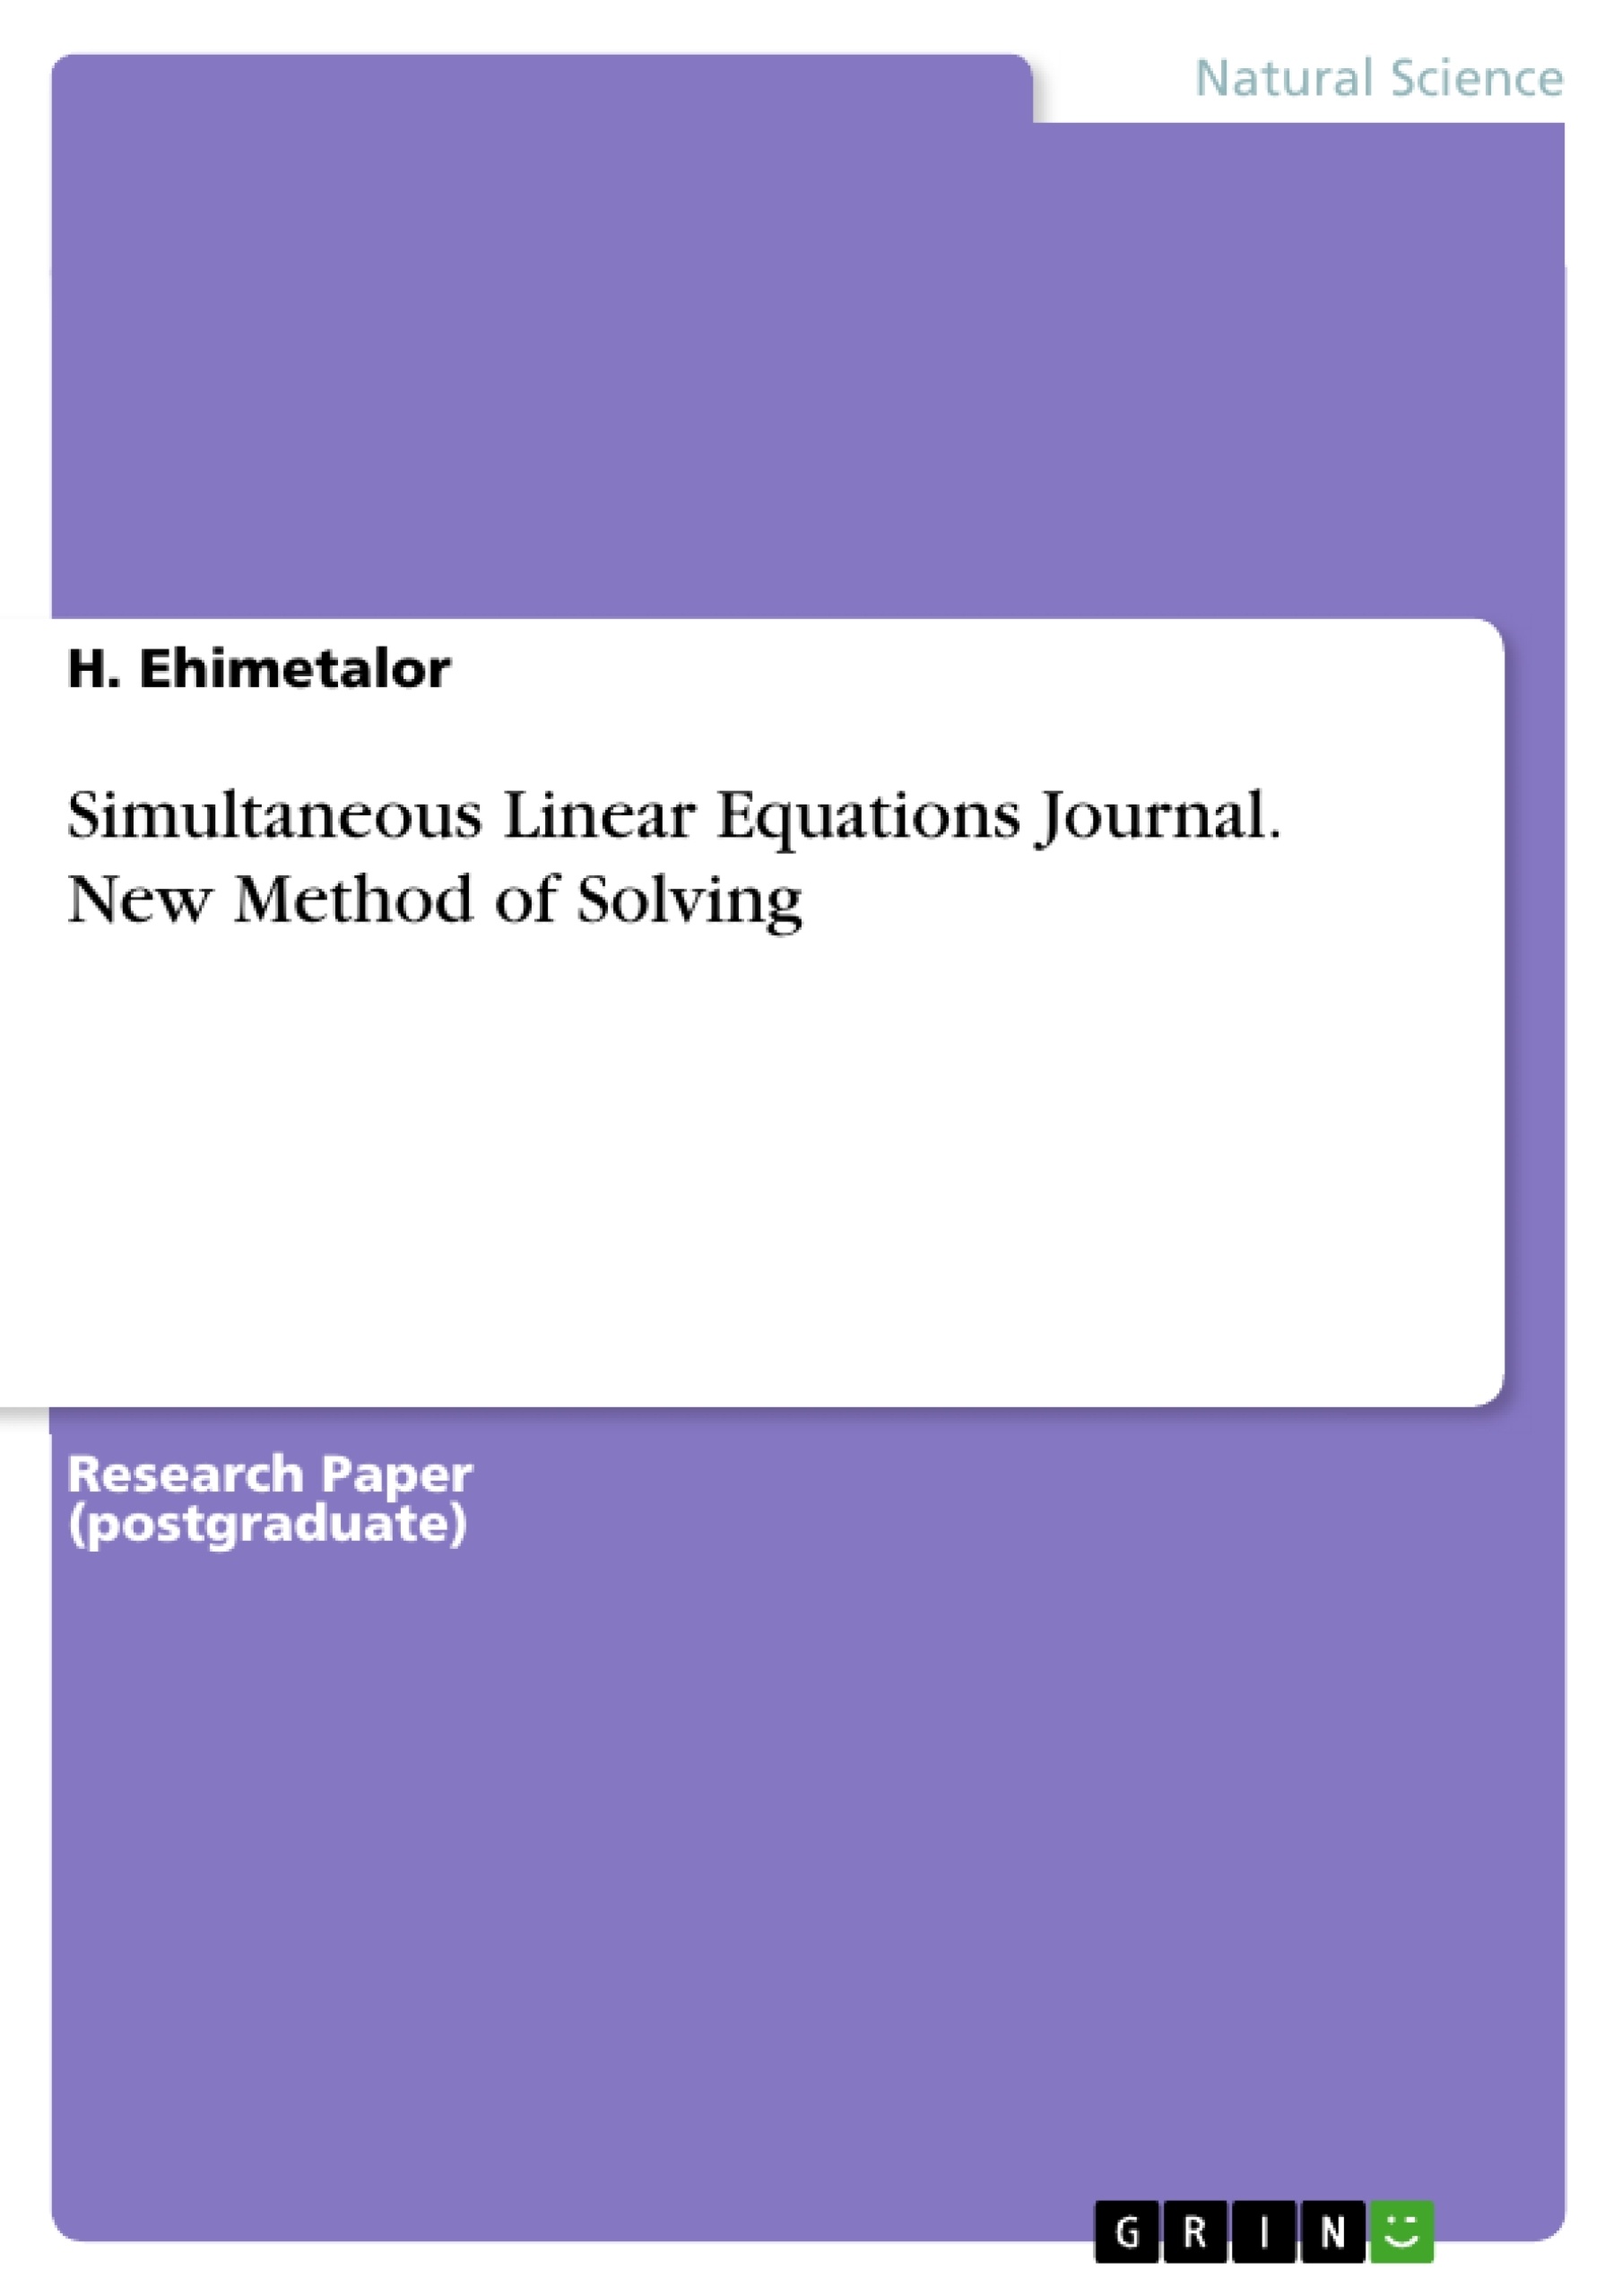 Titre: Simultaneous Linear Equations Journal. New Method of Solving